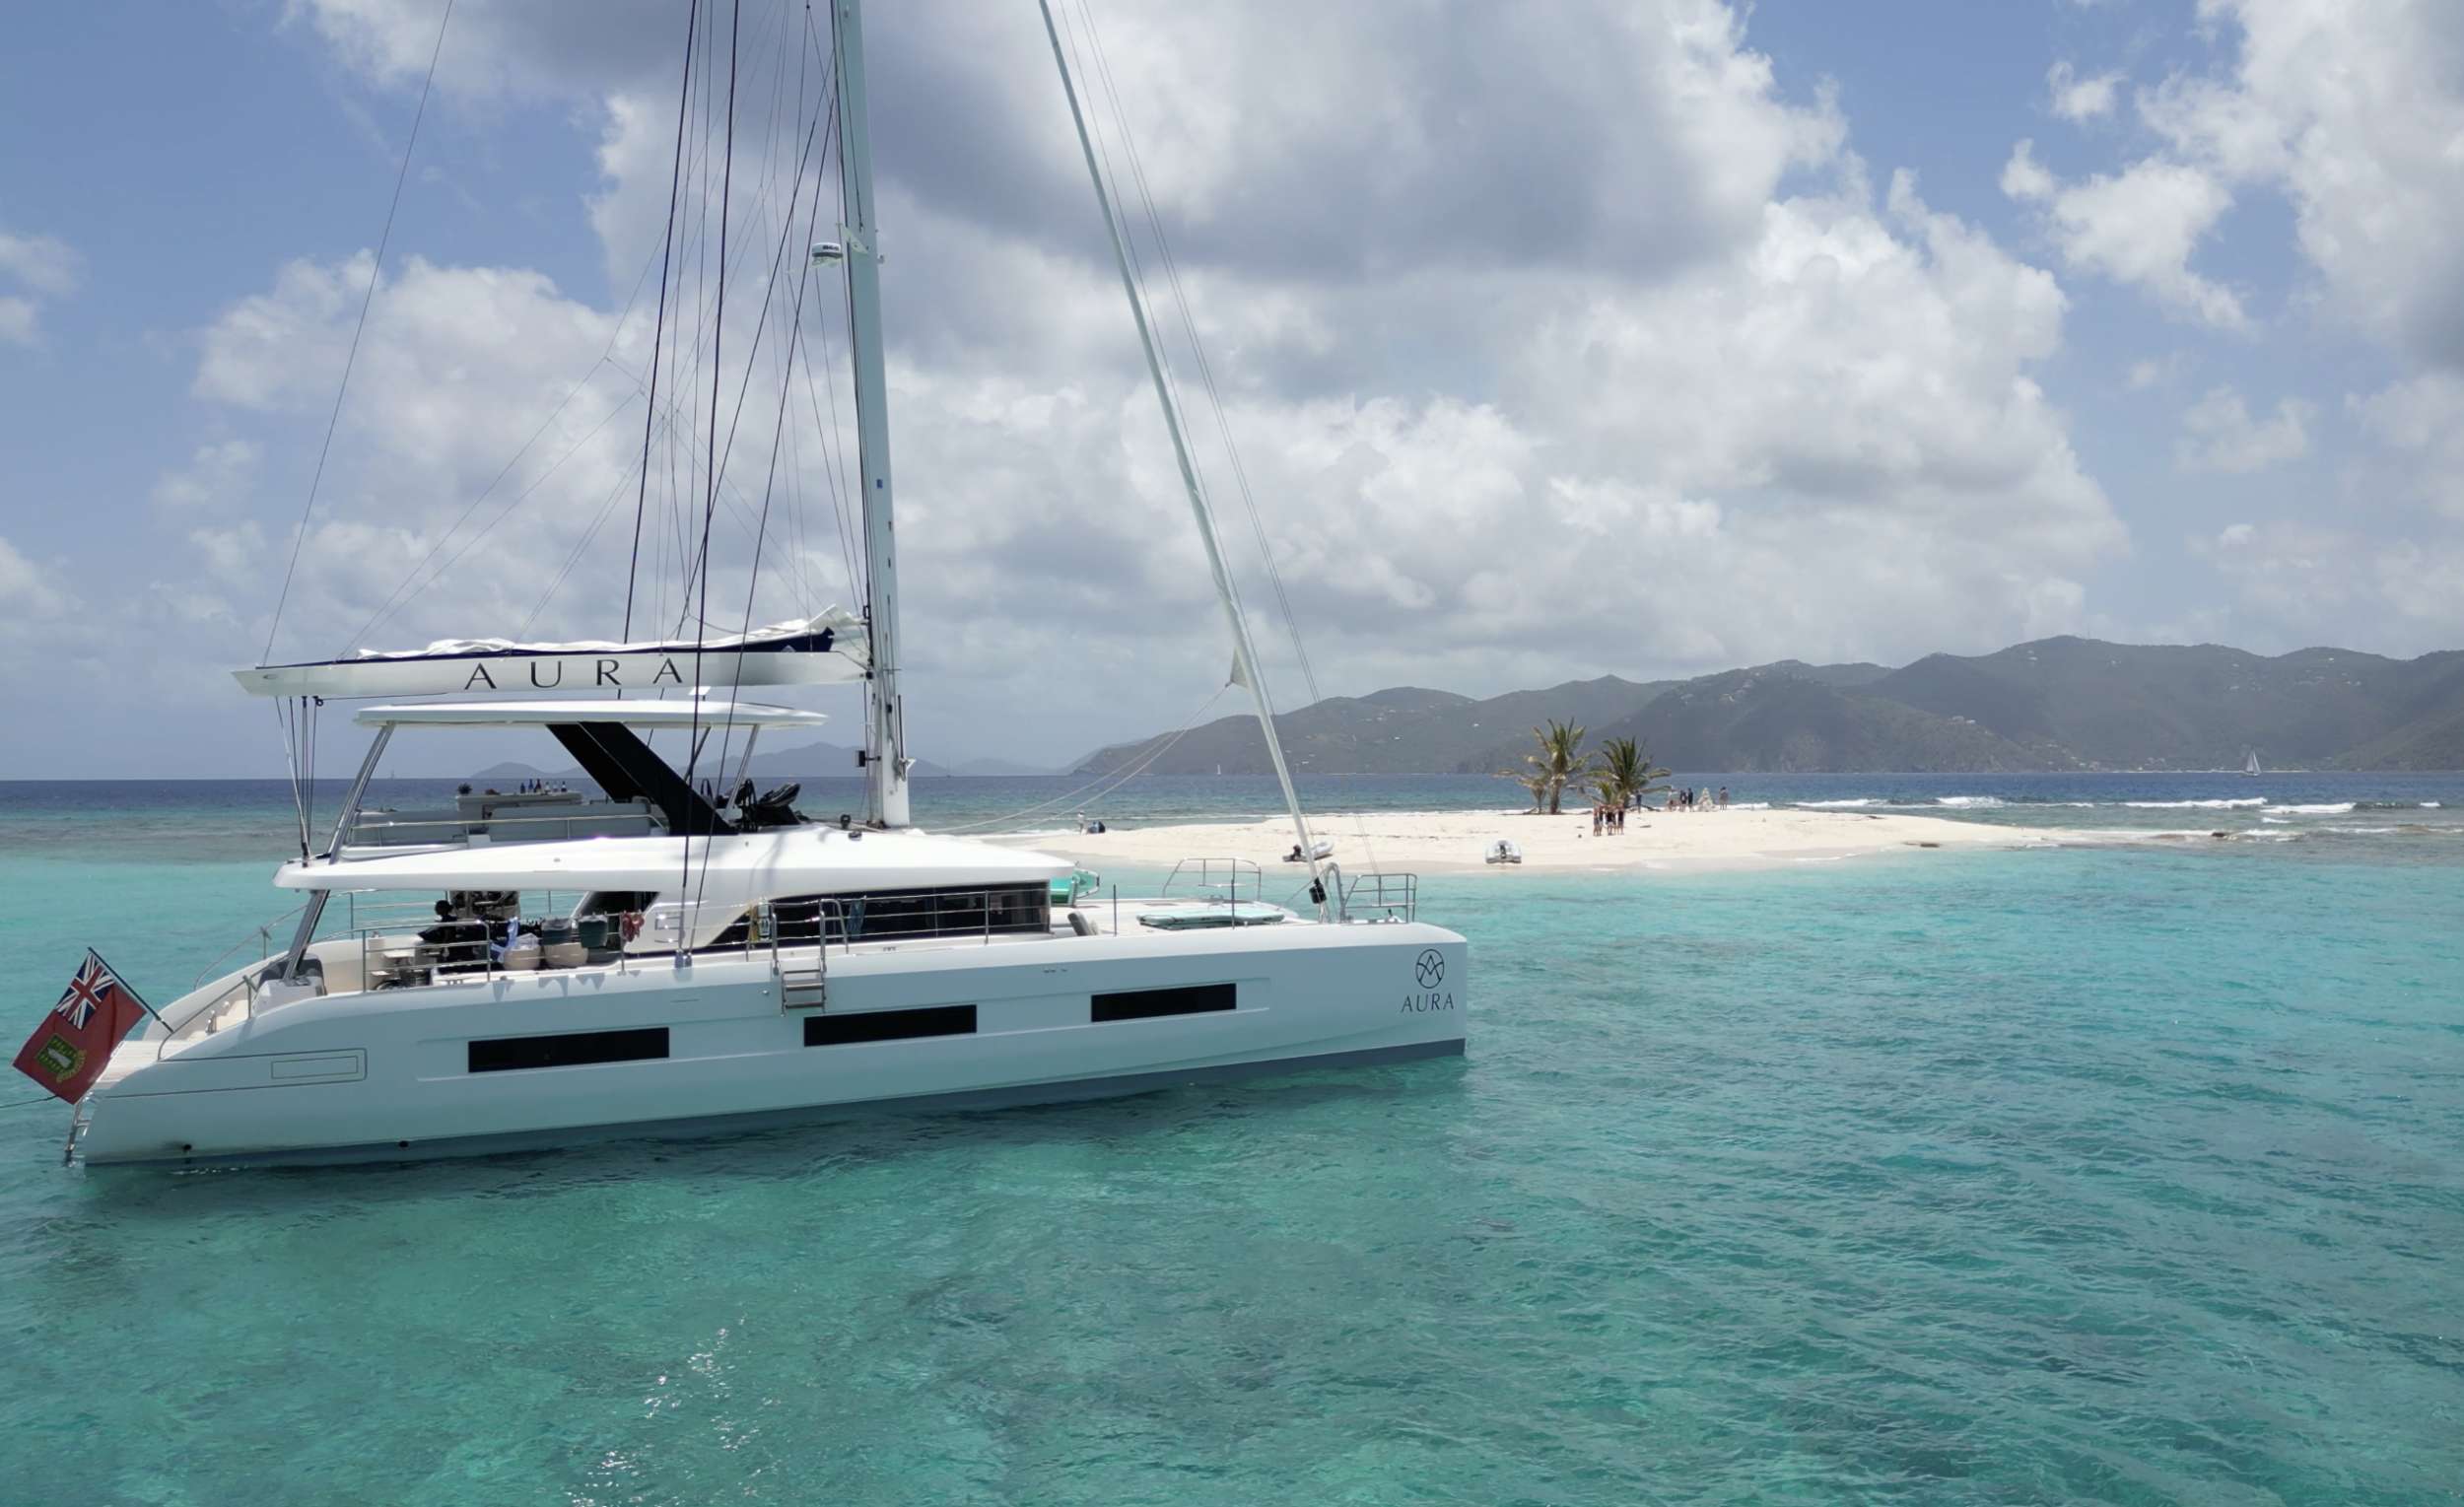 Aura Yacht anchored off sandy spit in the BVI